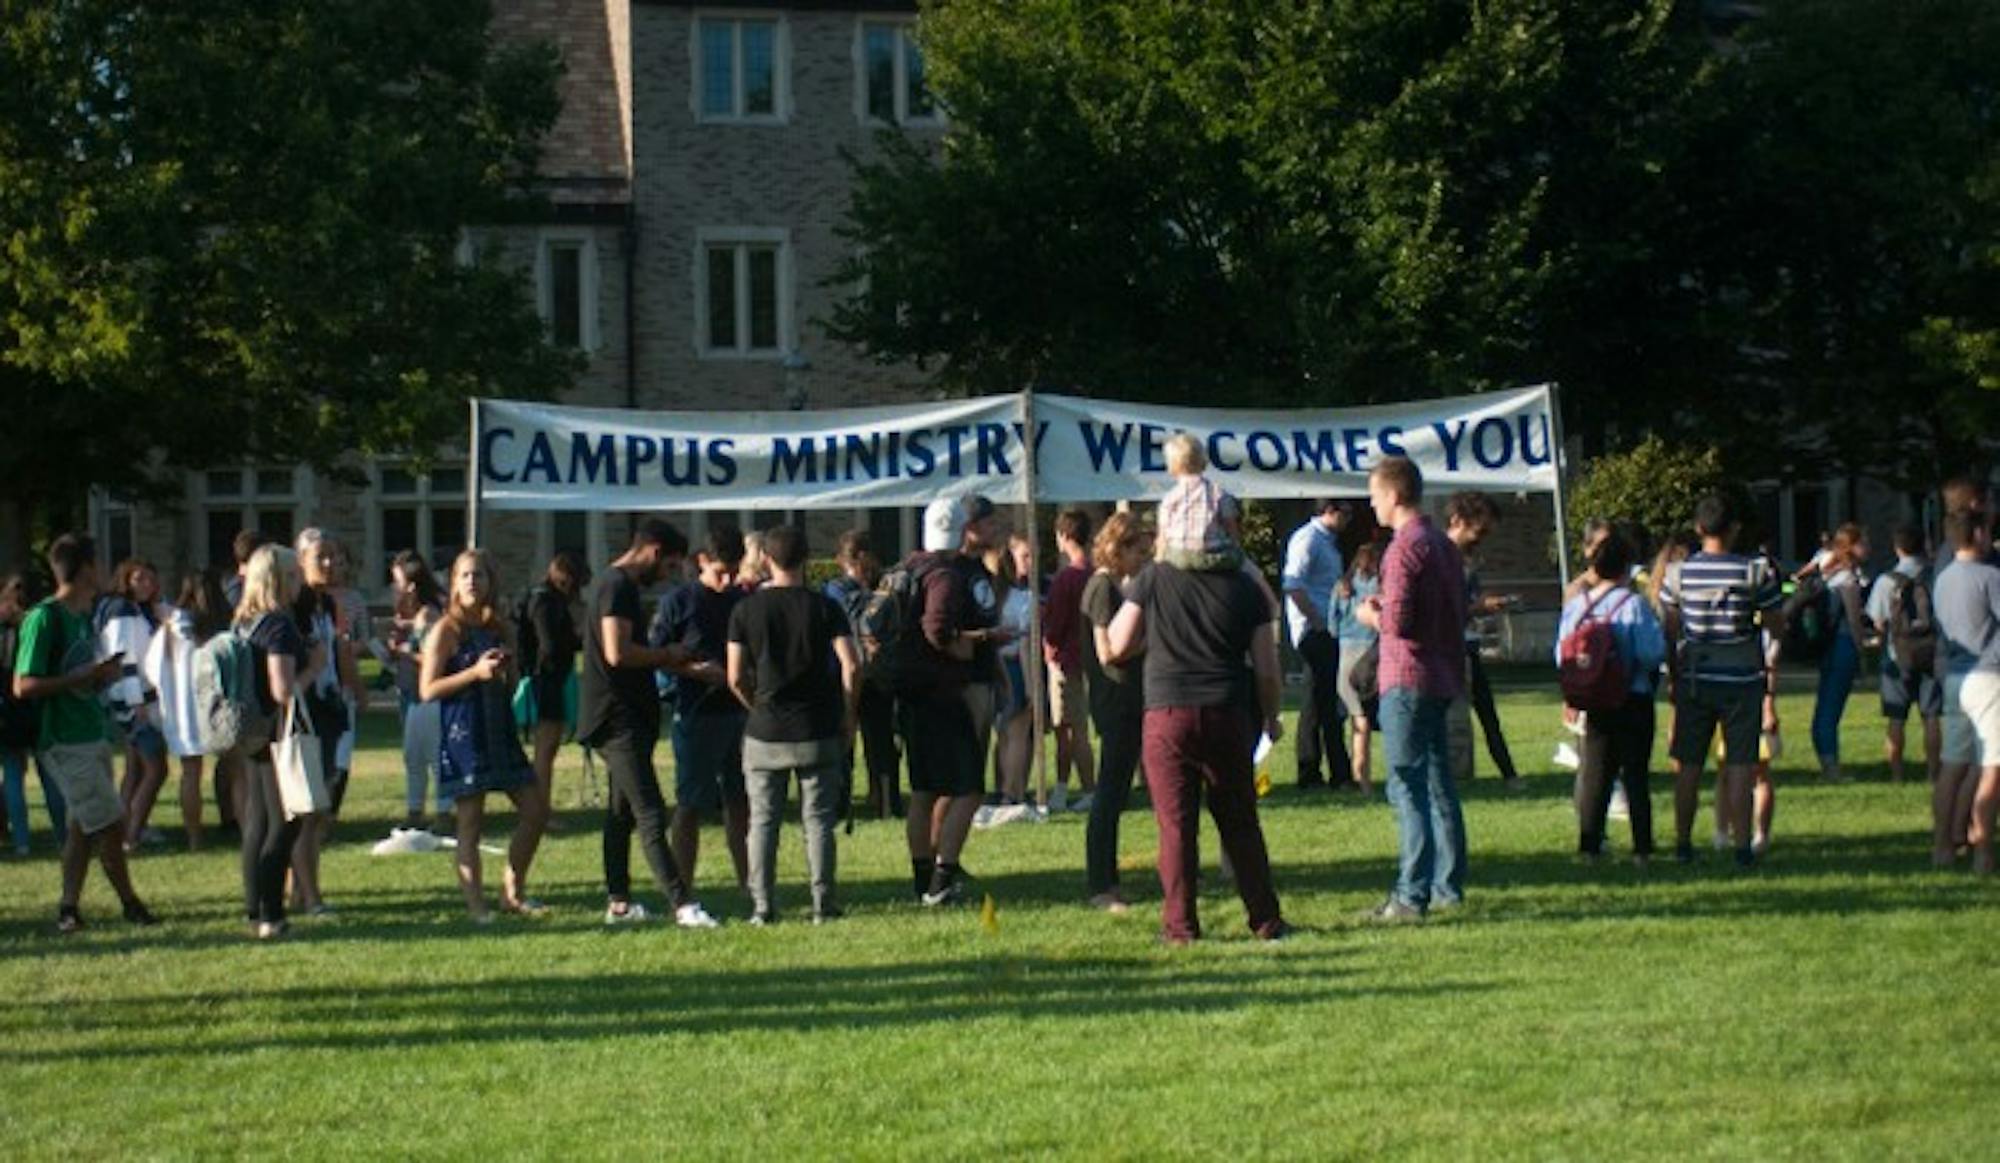 Students attend an introduction to Notre Dame's faith-based groups and clubs hosted by Campus Ministry on South Quad on Wednesday.